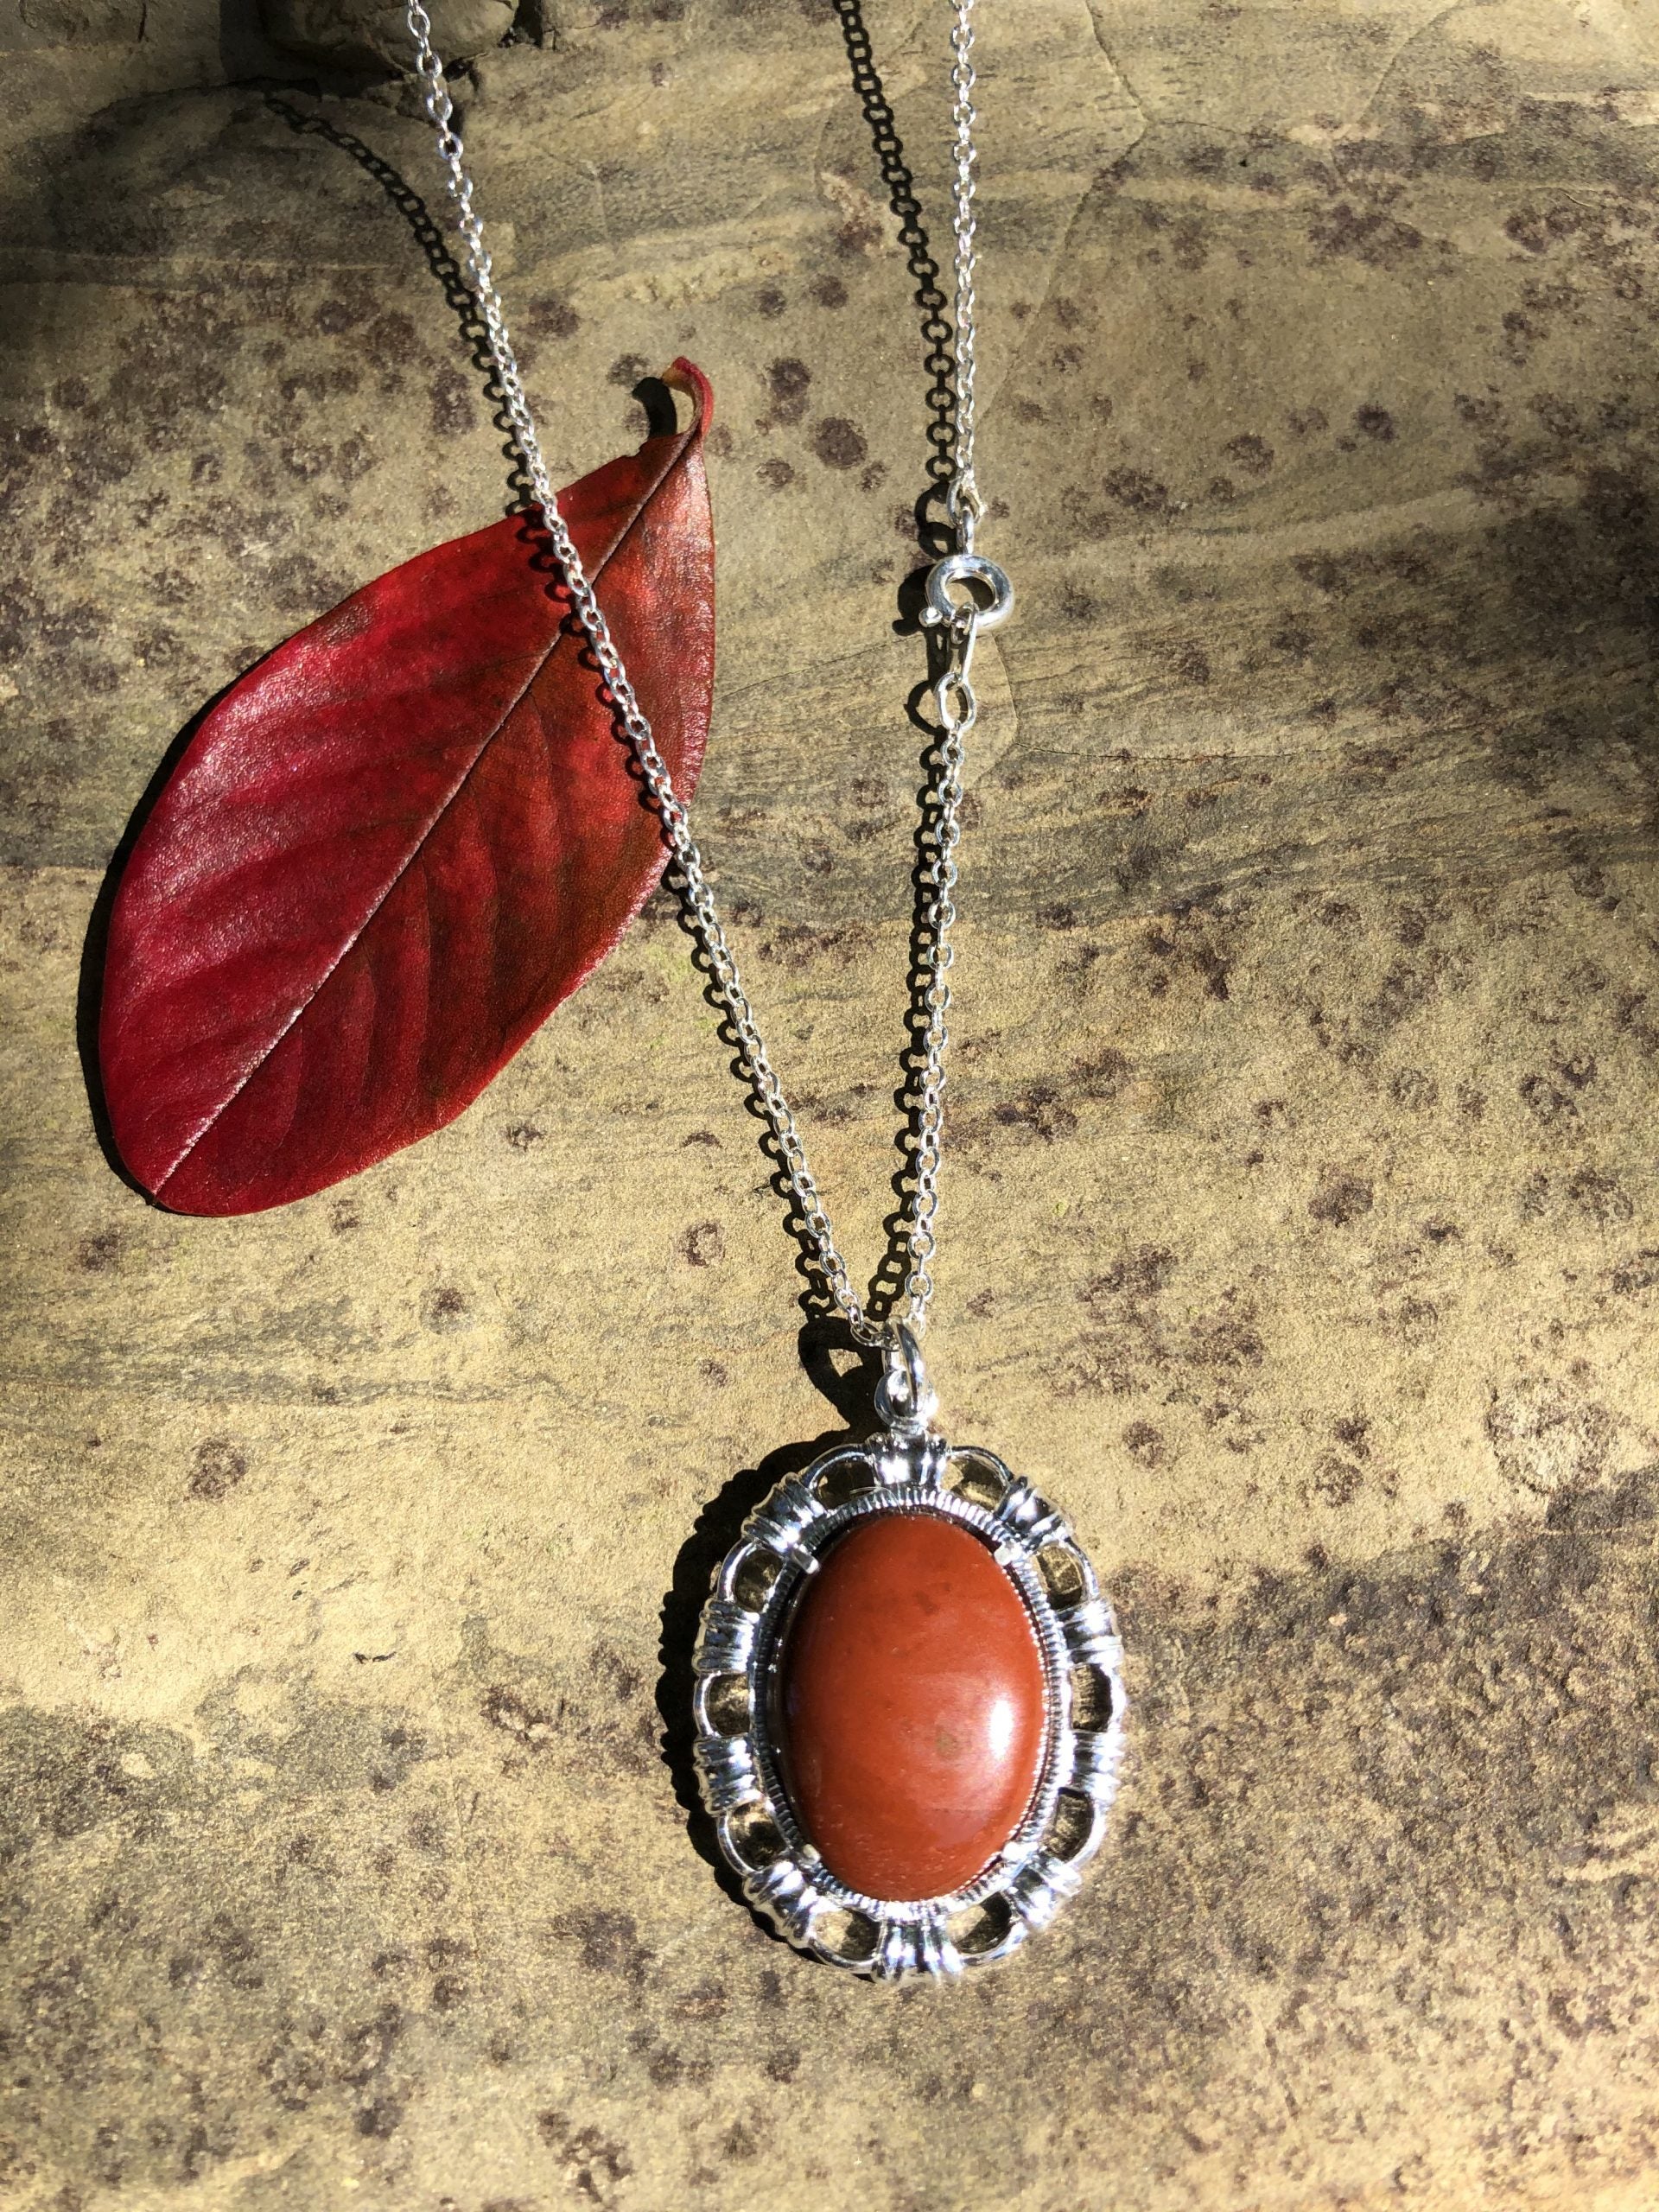 Necklace with New Zealand red Jasper, rich, deep red, hand polished to a 20x15mm cabochon and set in a silver plated setting with 19 inch chain, regular